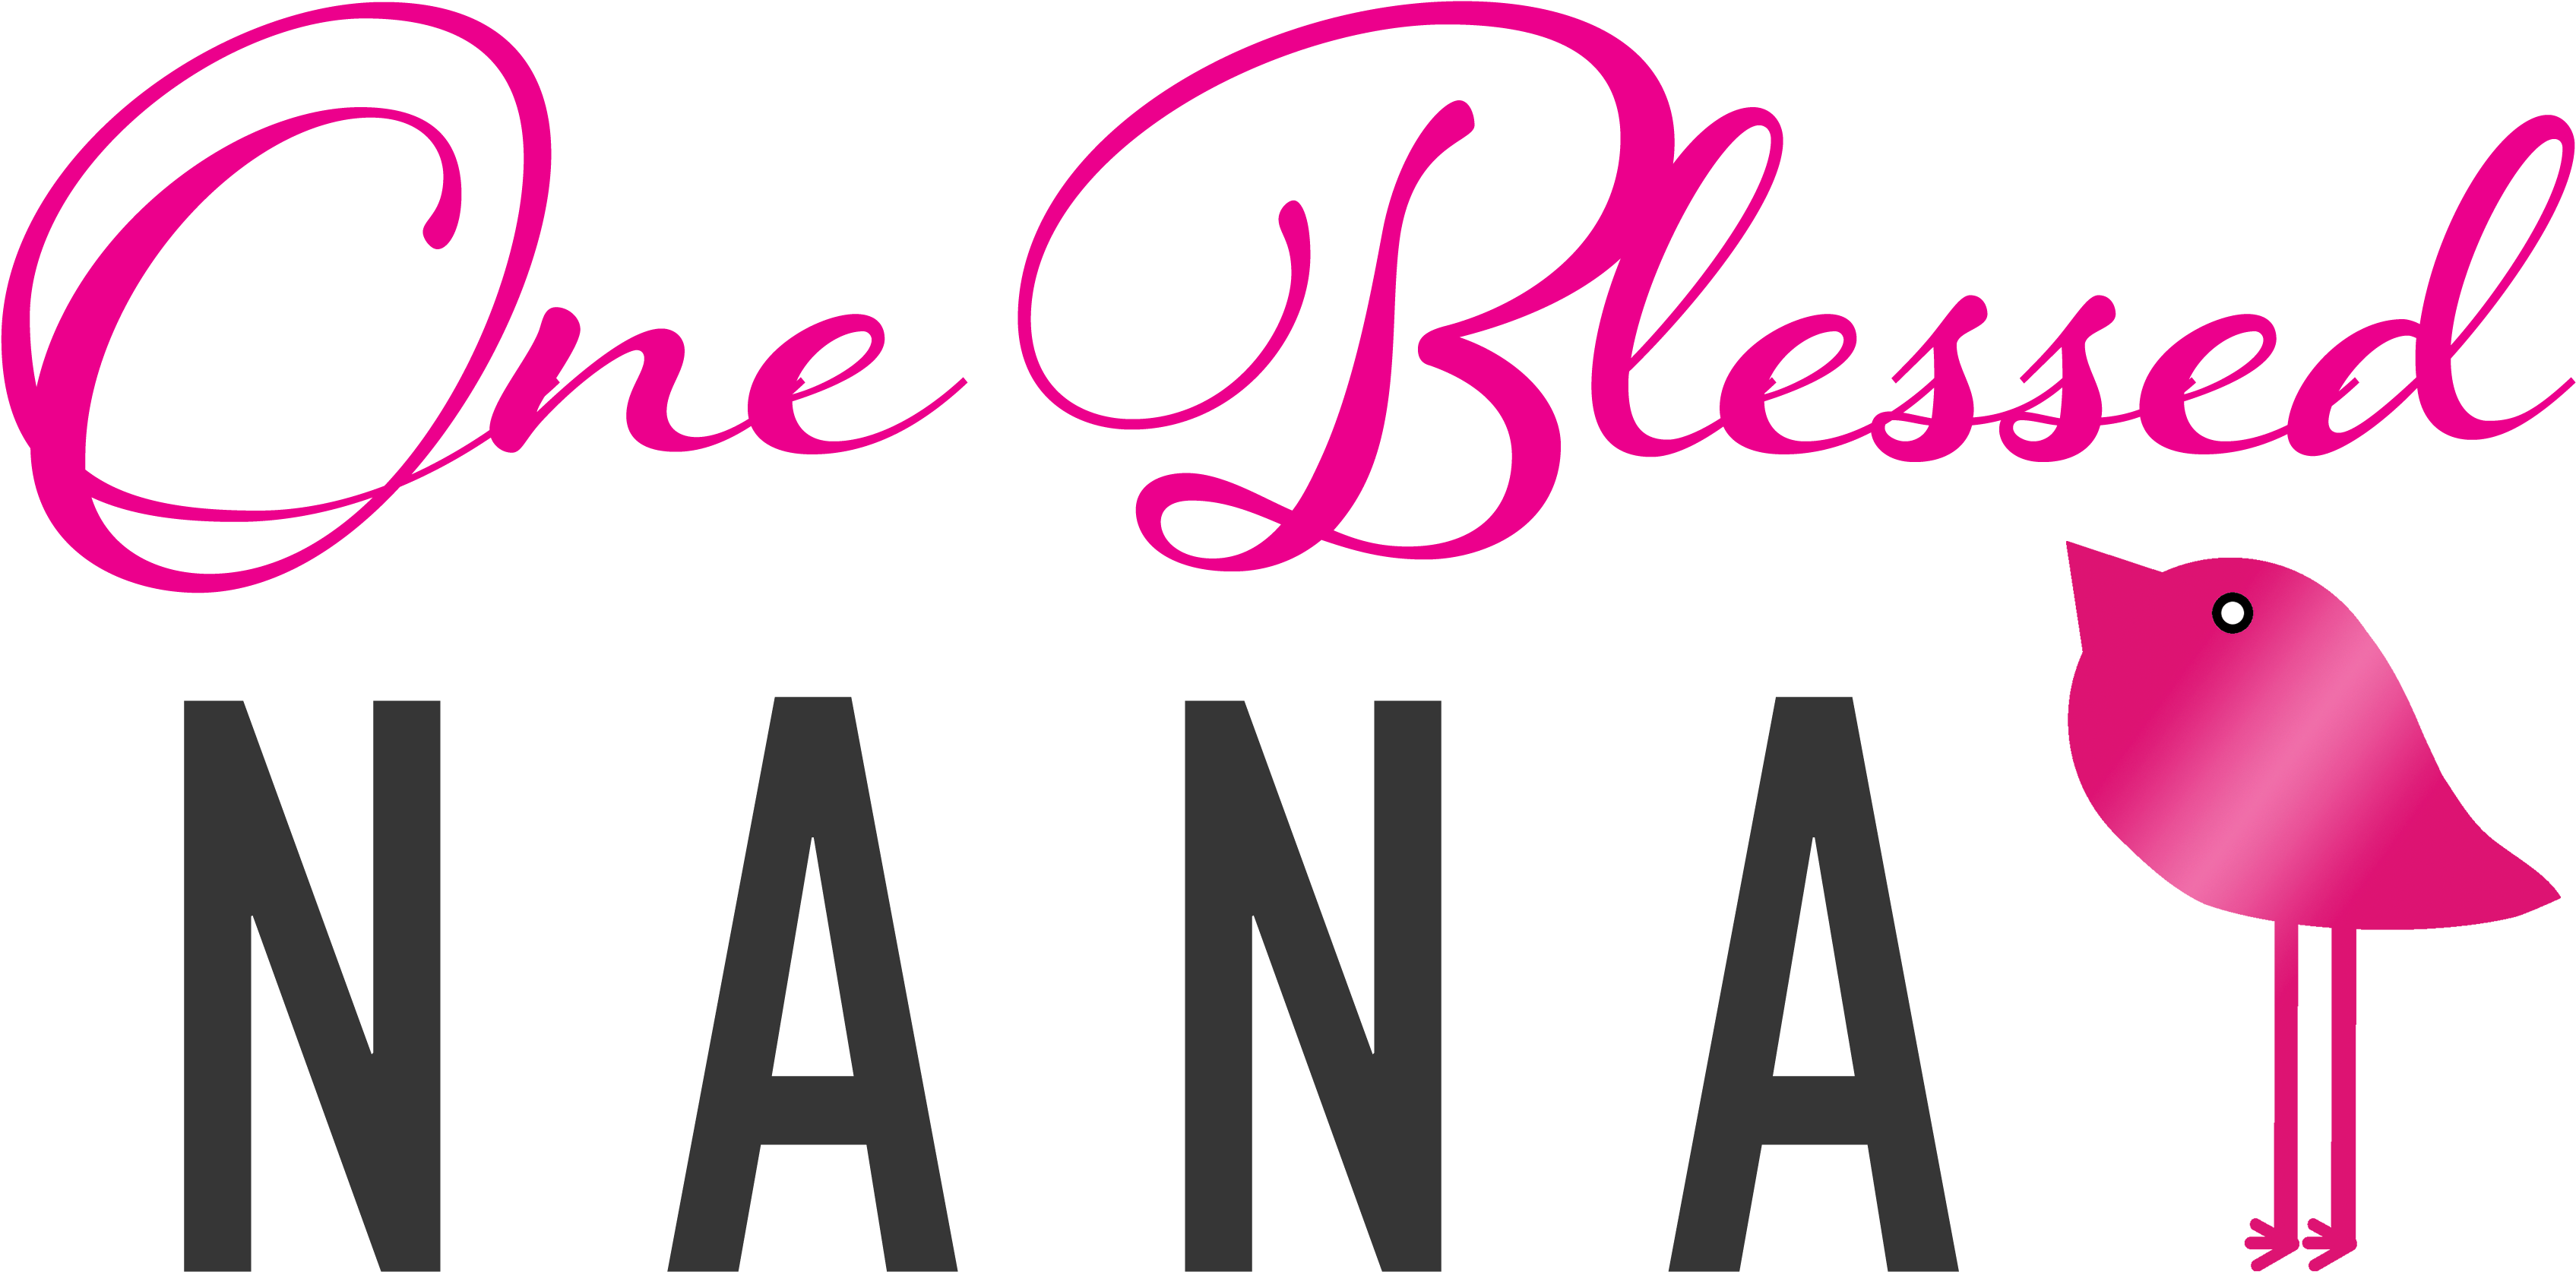 One Blessed Nana Tote Bag By Bling Chicks - One Blessed Nana Tote Bag By Bling Chicks (3600x3600)